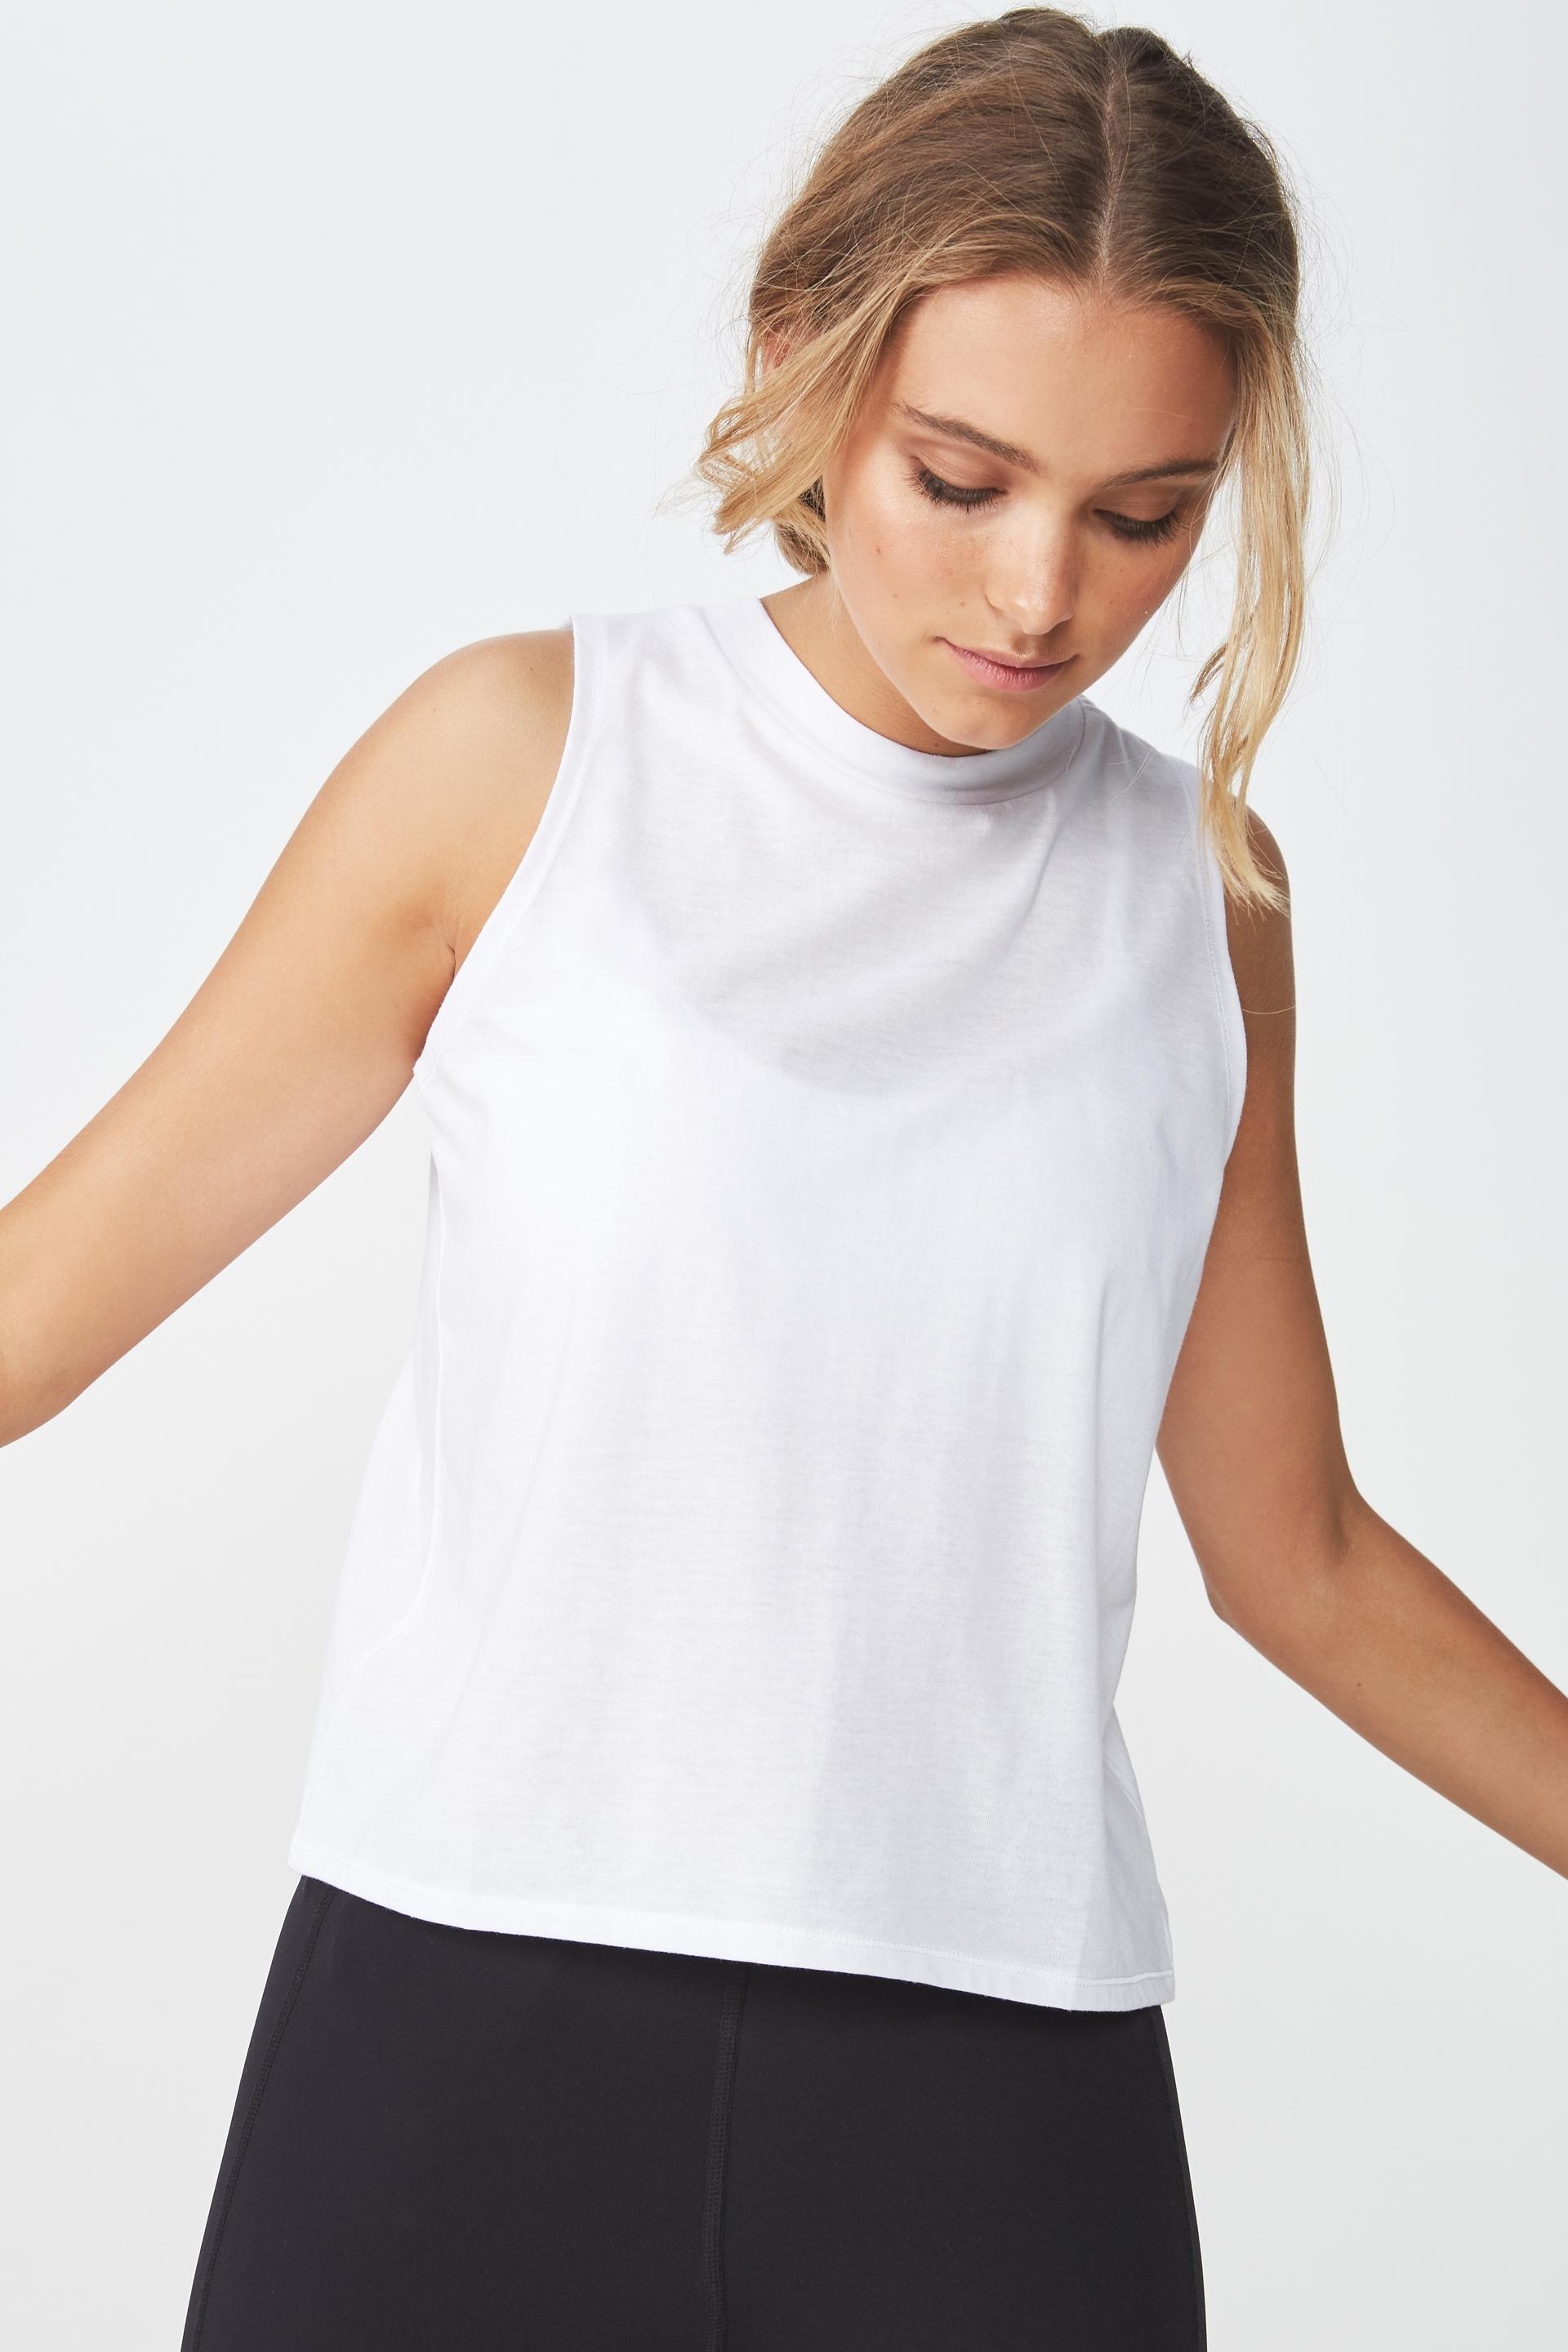 Cross over tank top - white Cotton On T-Shirts | Superbalist.com